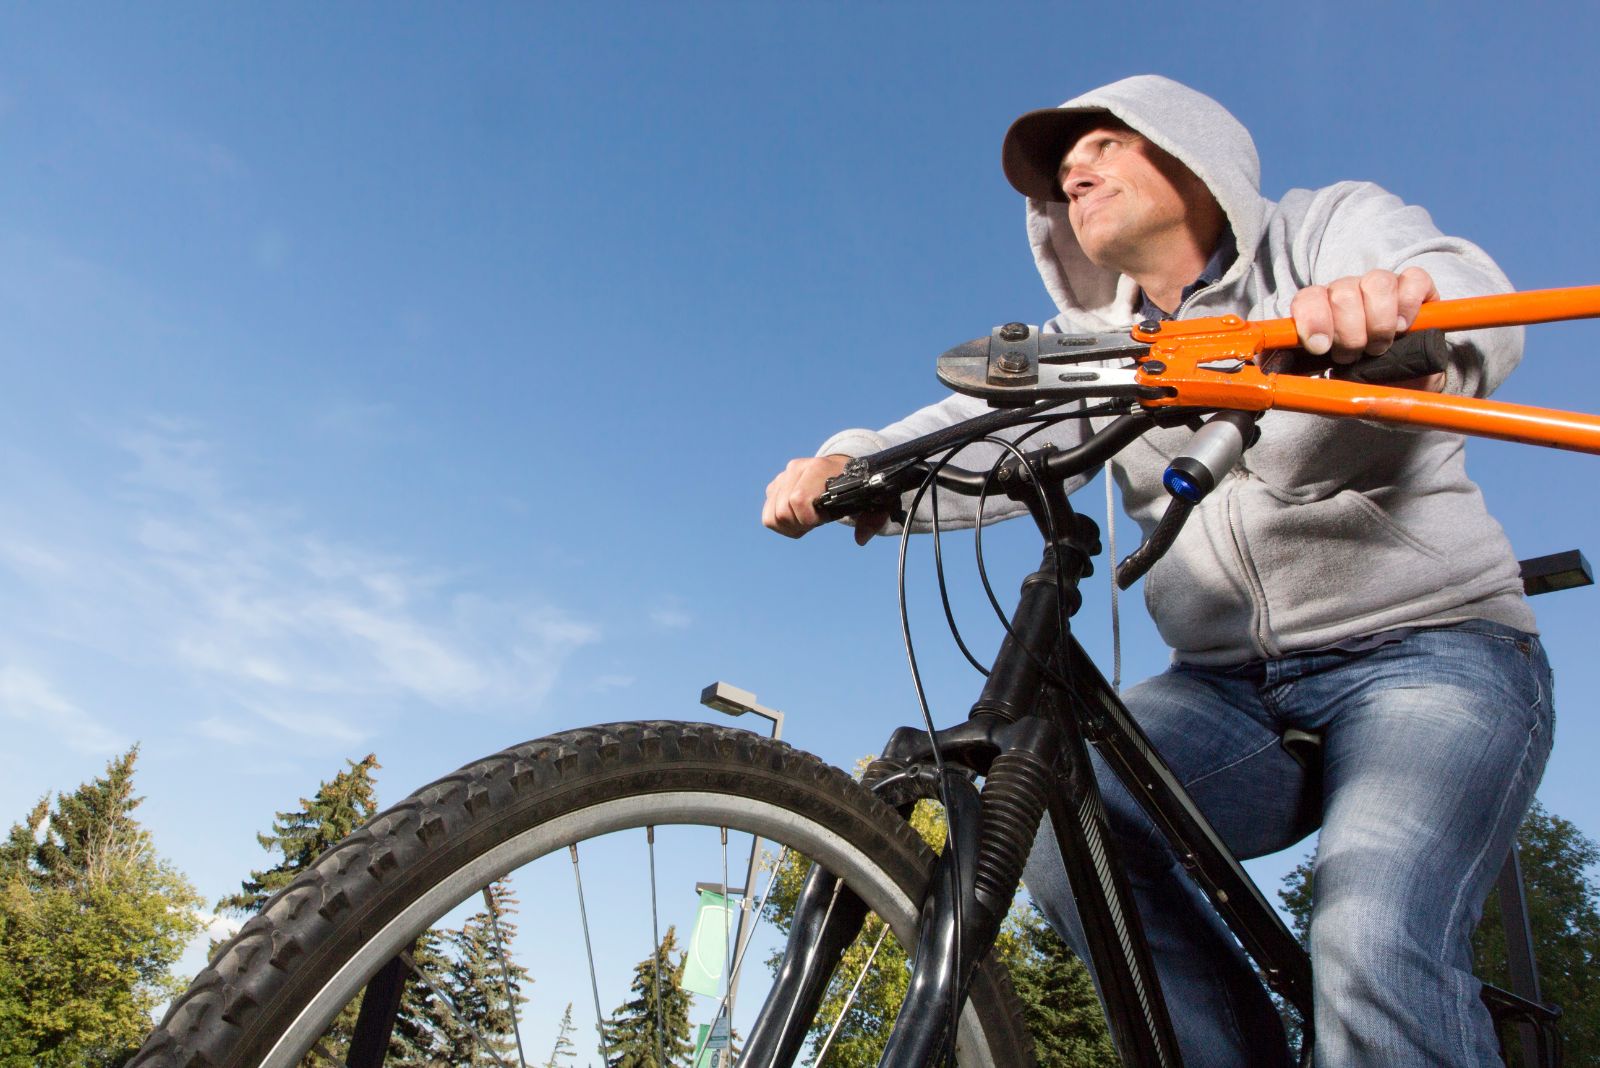 This Bicycle Alarm Calls Your Phone if Someone Tries to Steal It